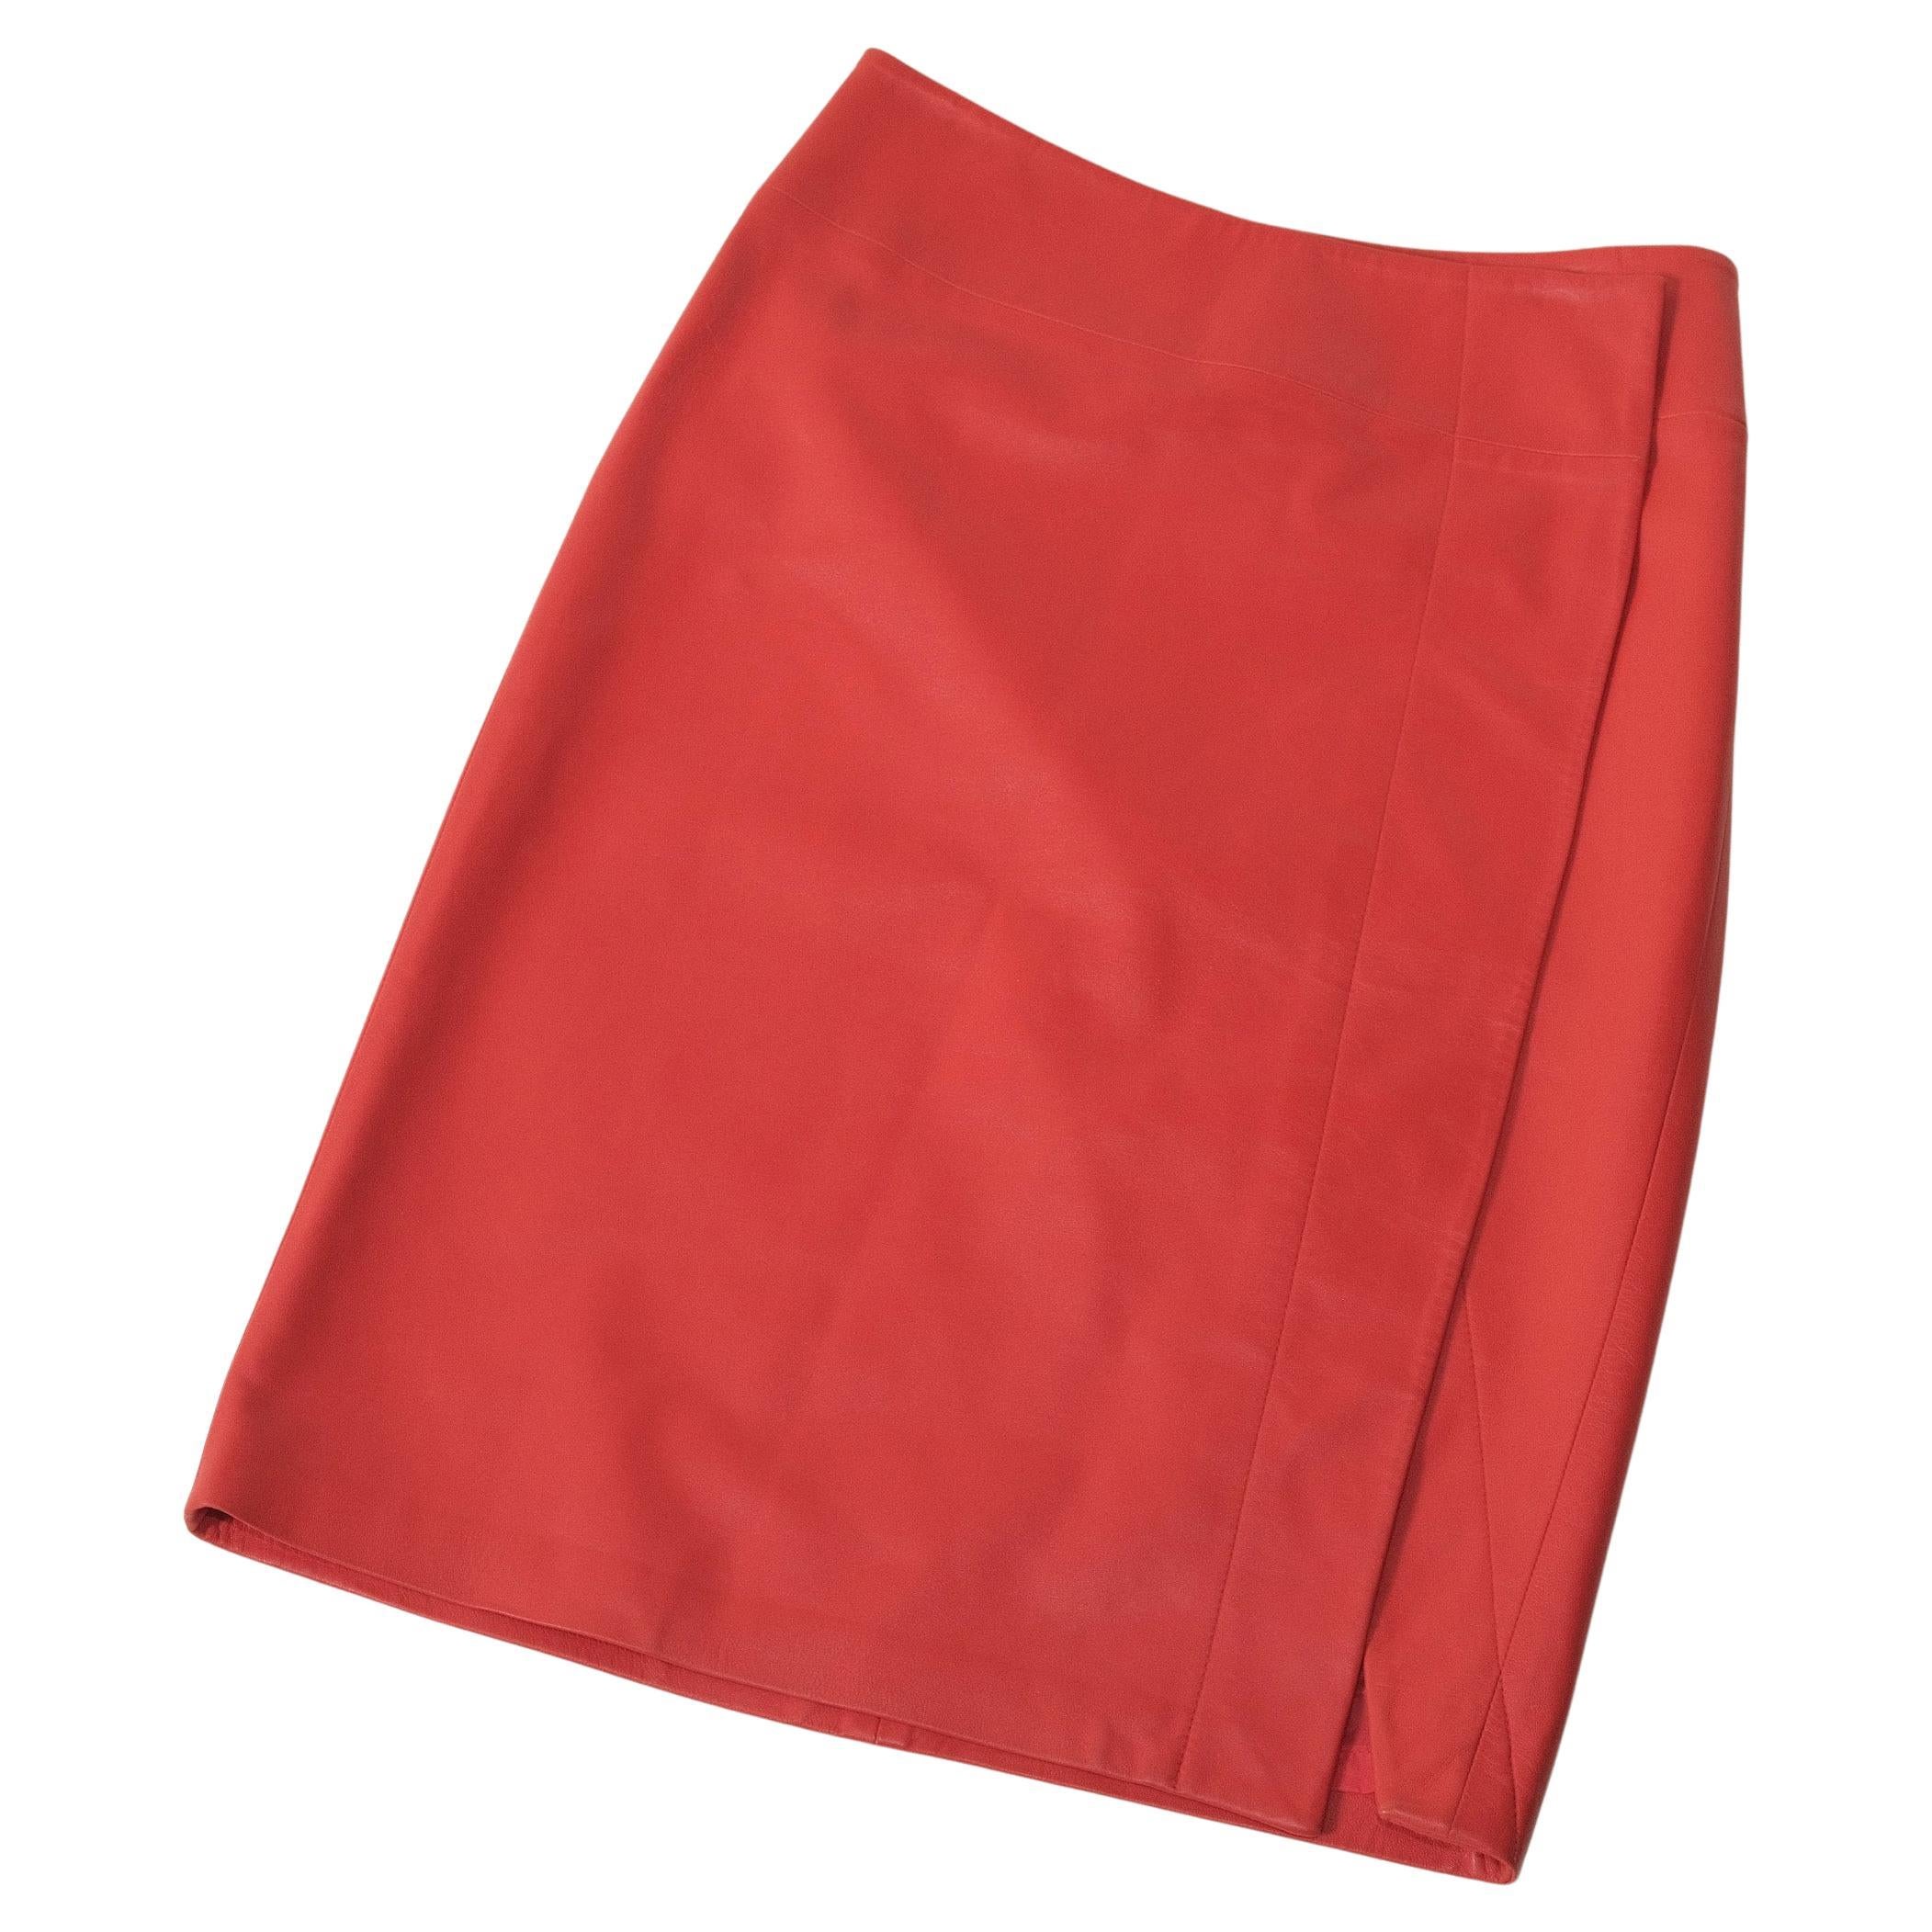 Donna Karan Leather Wrap Skirt Tomato Red Size US4 IT40 FR38 1990's For Sale